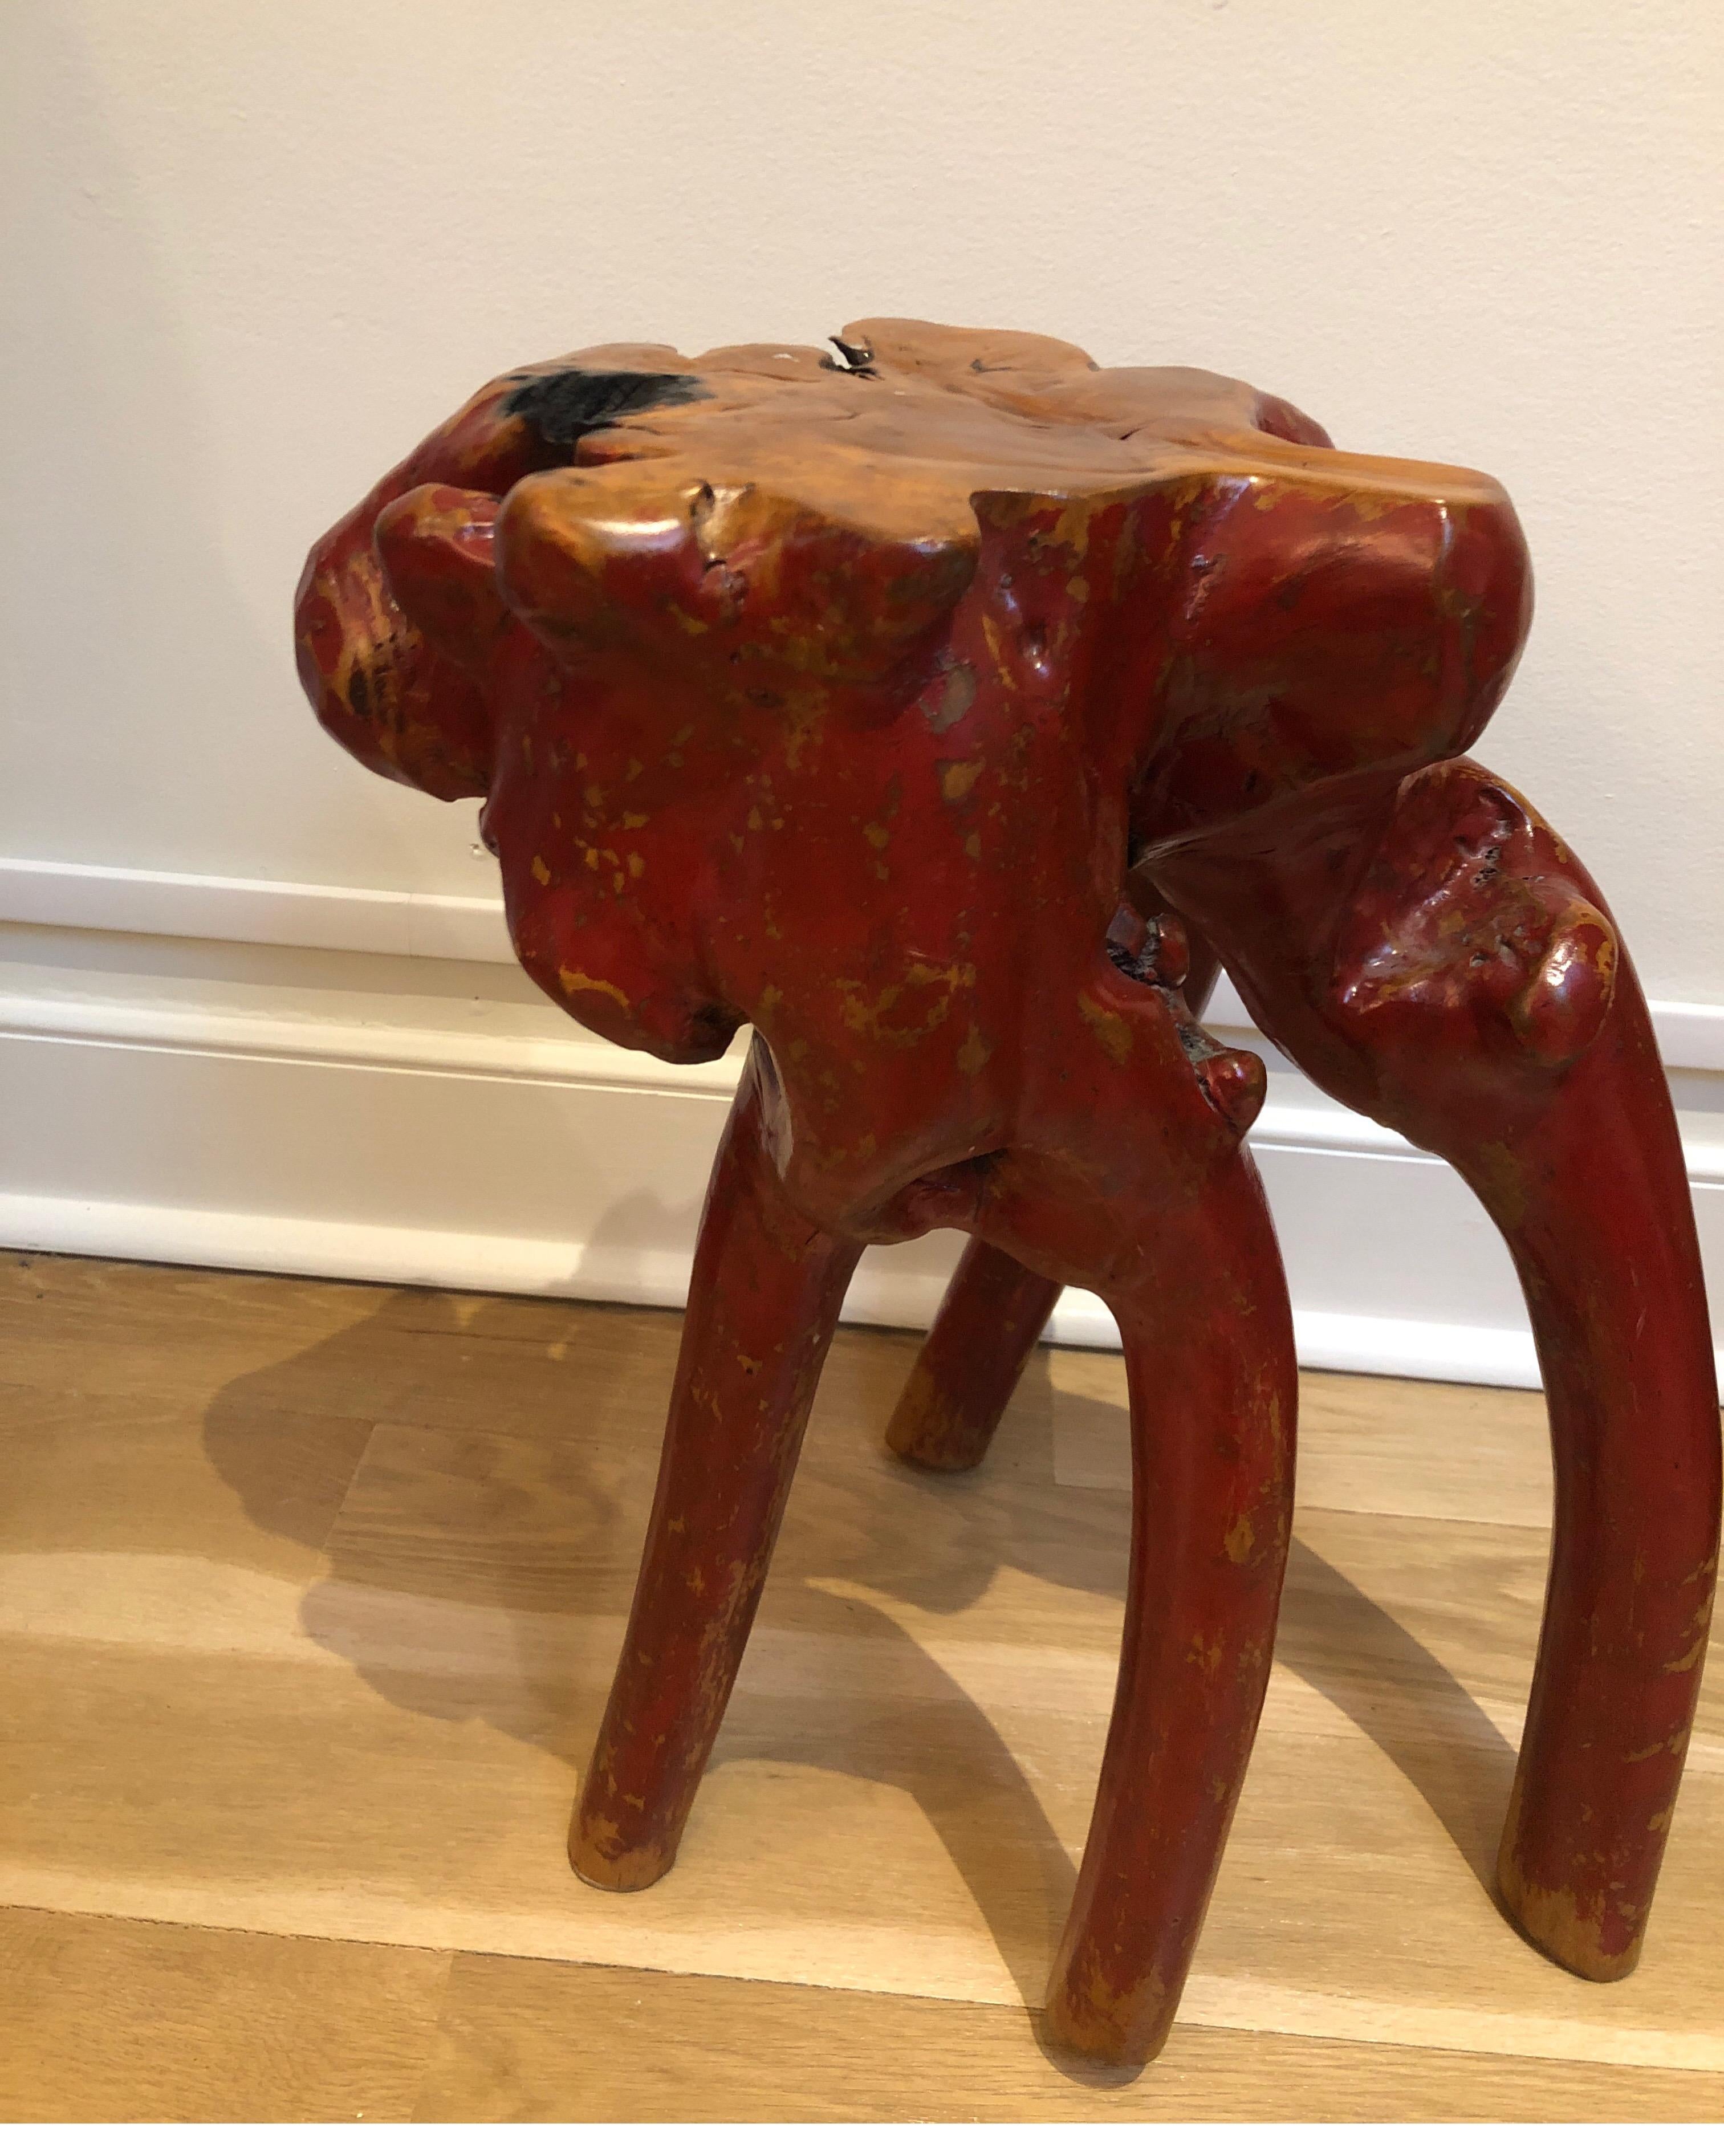 Unique natural tree root side table. Lacquered red base.
Measures: 21” H.